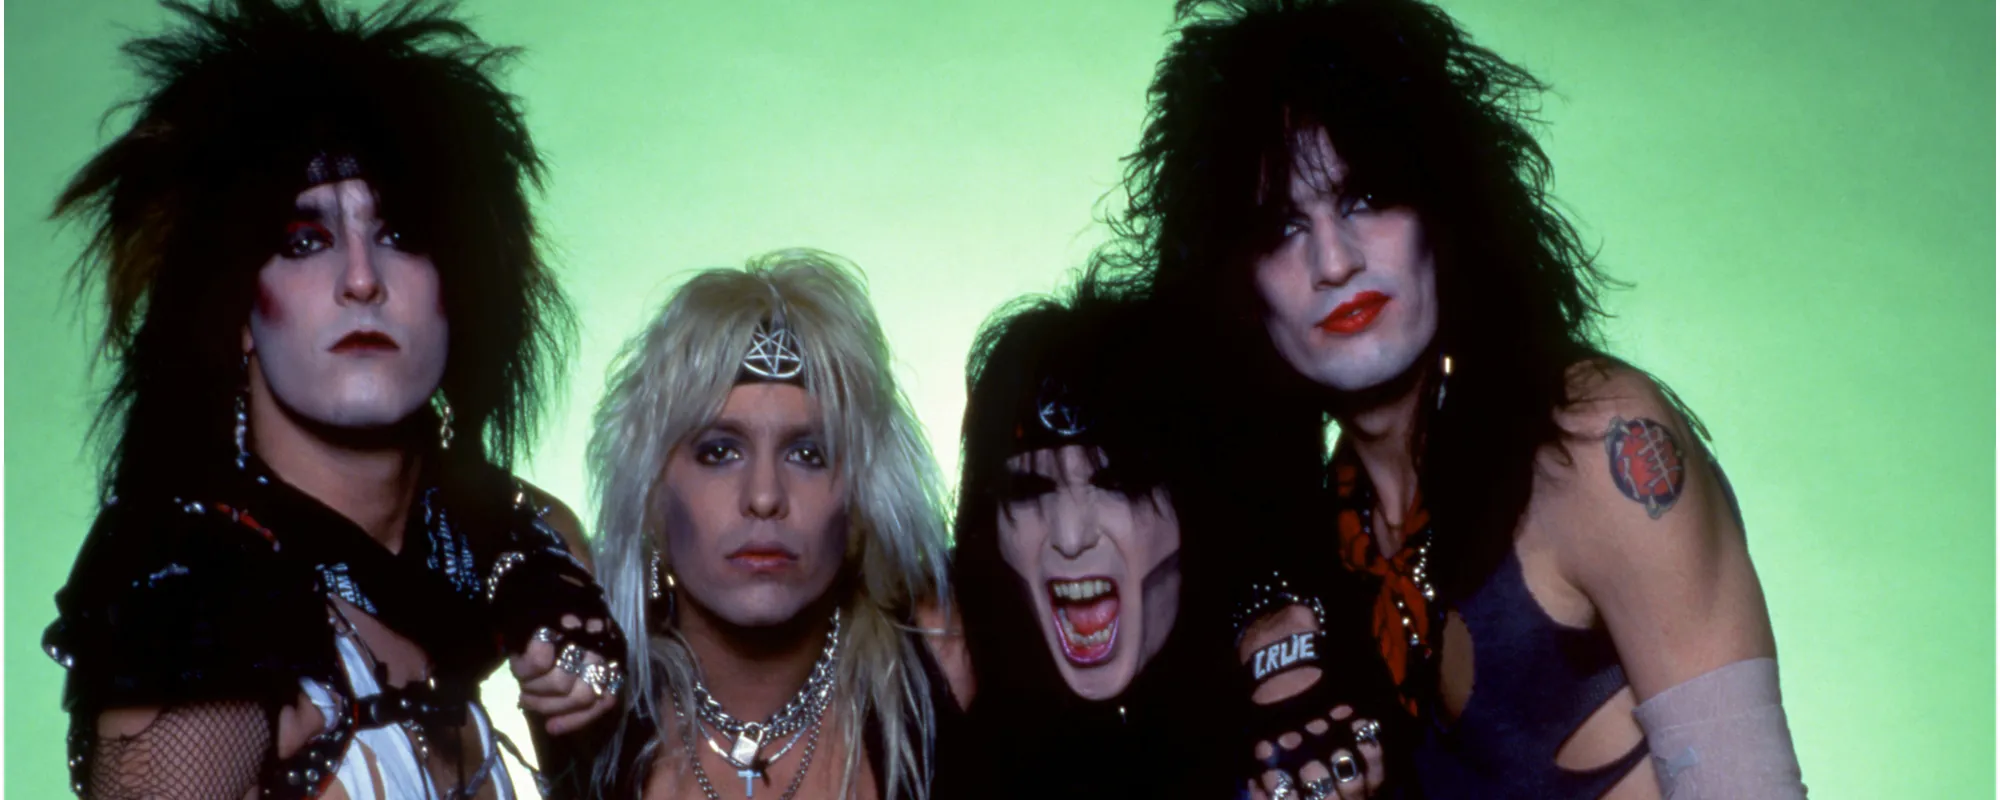 Top 10 Hair Metal Bands of the 1980s